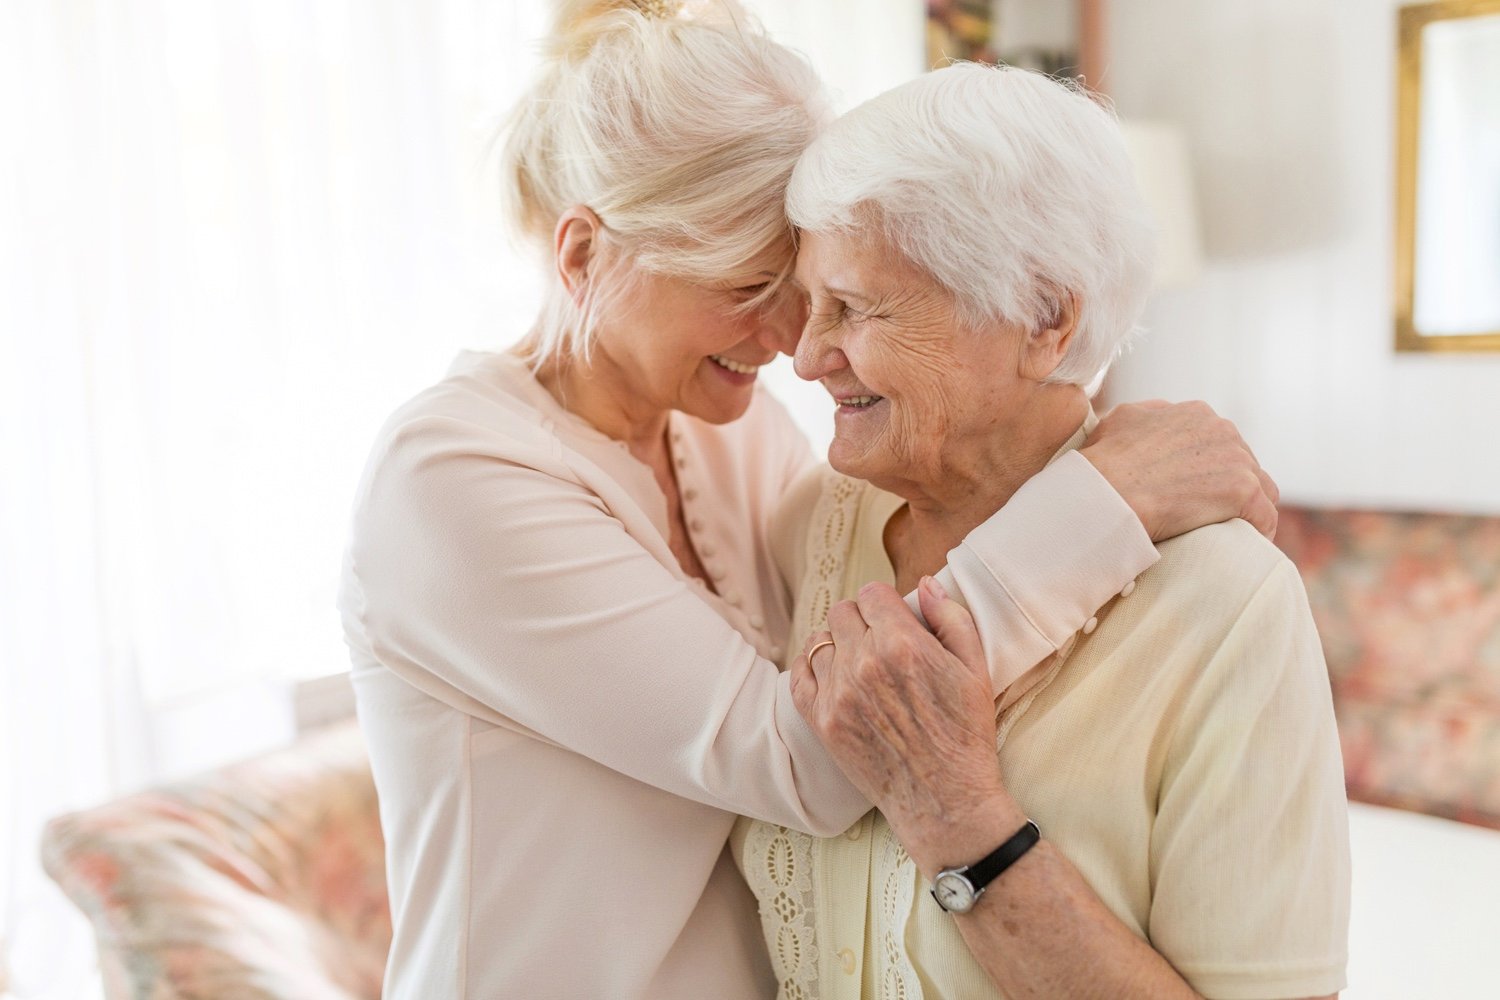 Two senior women smiling and embracing